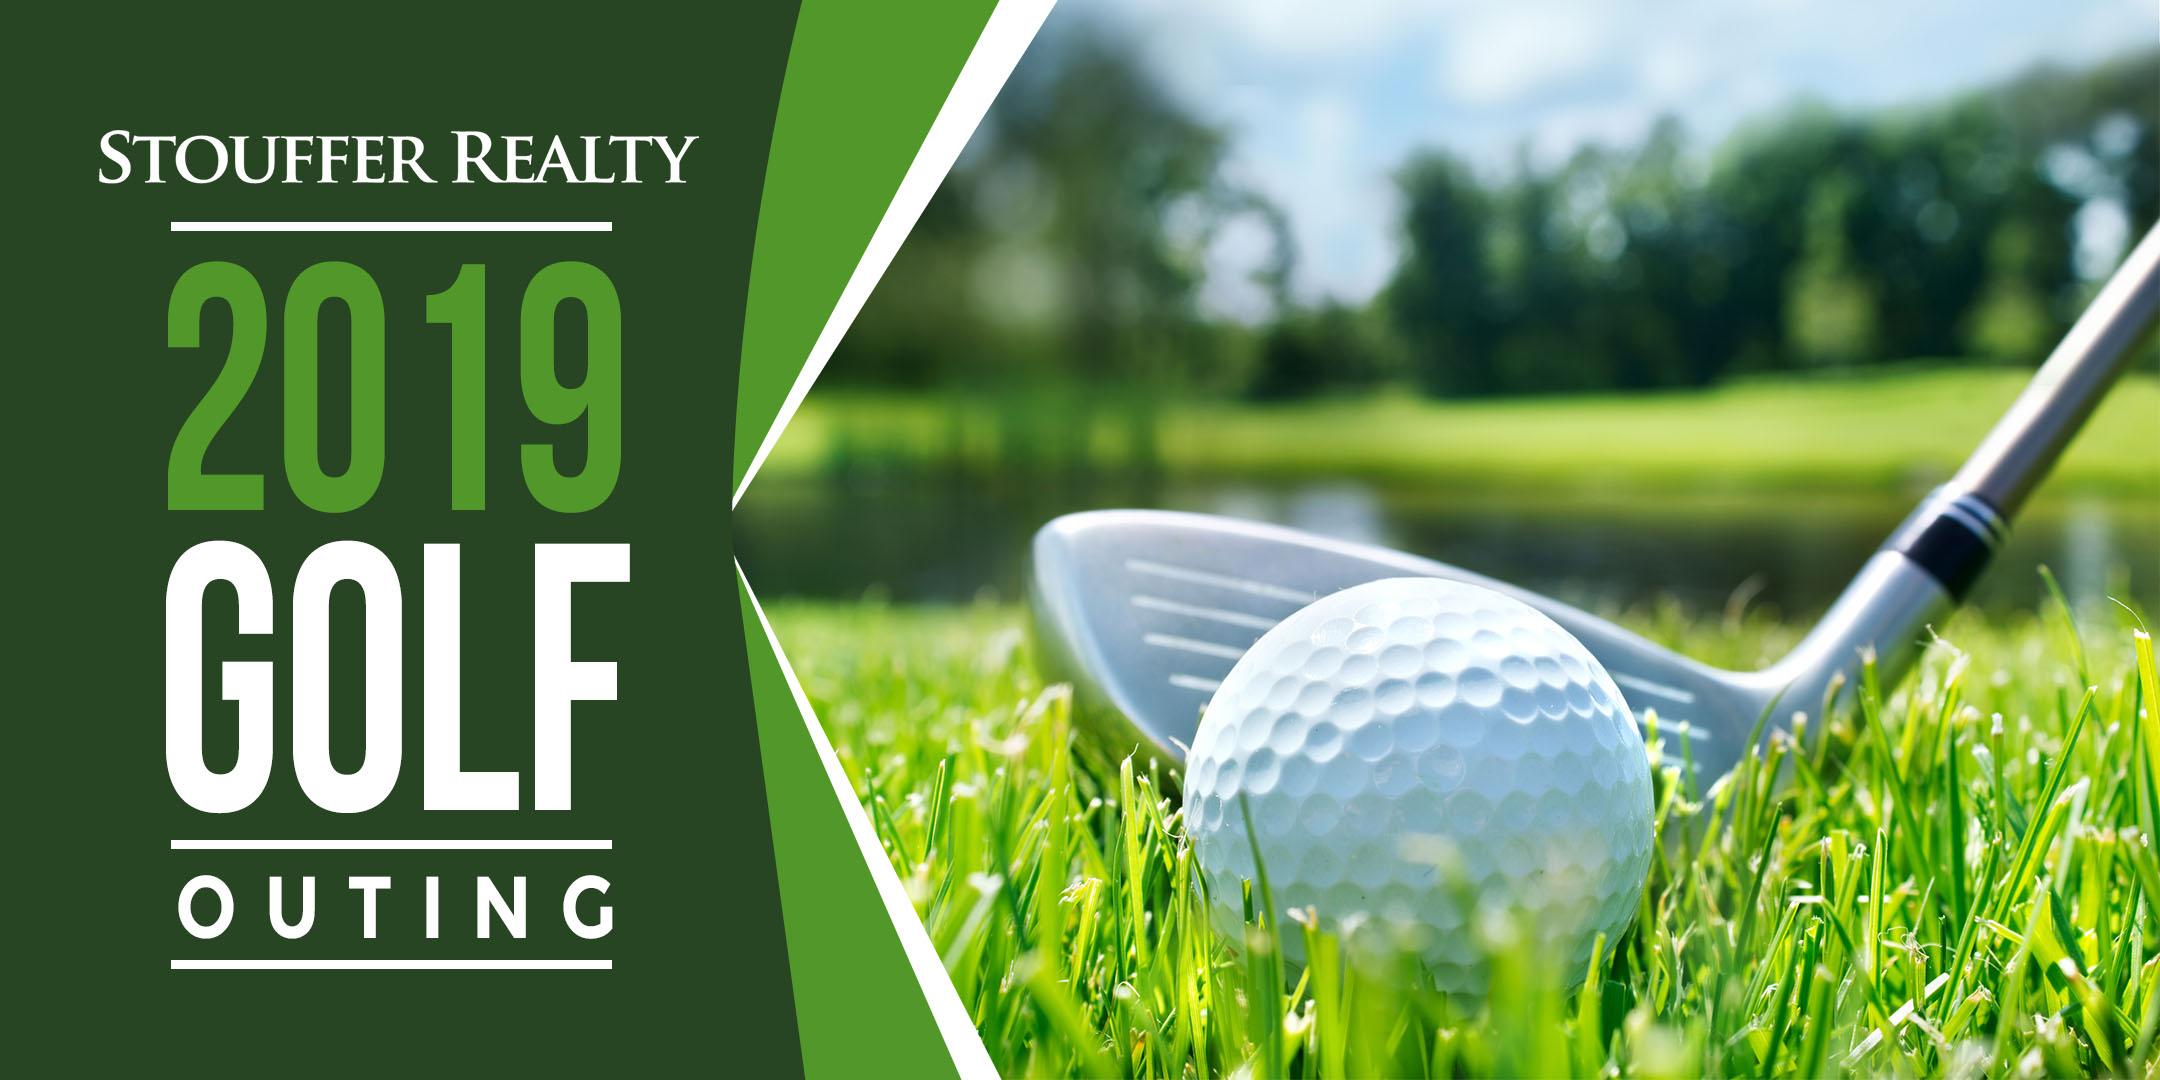 Stouffer Realty 2019 Golf Outing